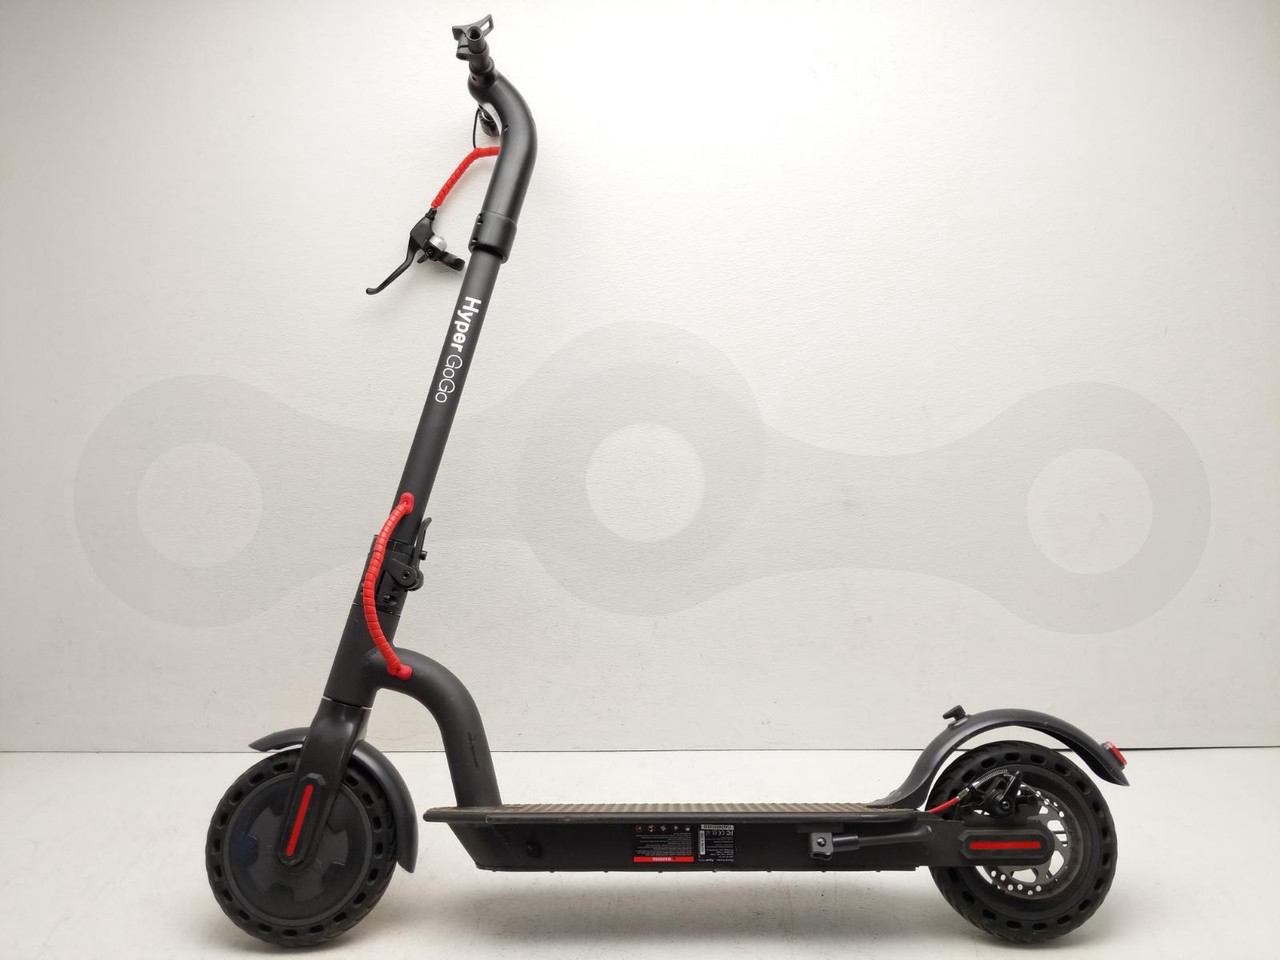 HYPER GOGO FOLDING PORTABLE COMPACT ELECTRIC SCOOTER 8.5" ALL TERRAIN TIRES  270W